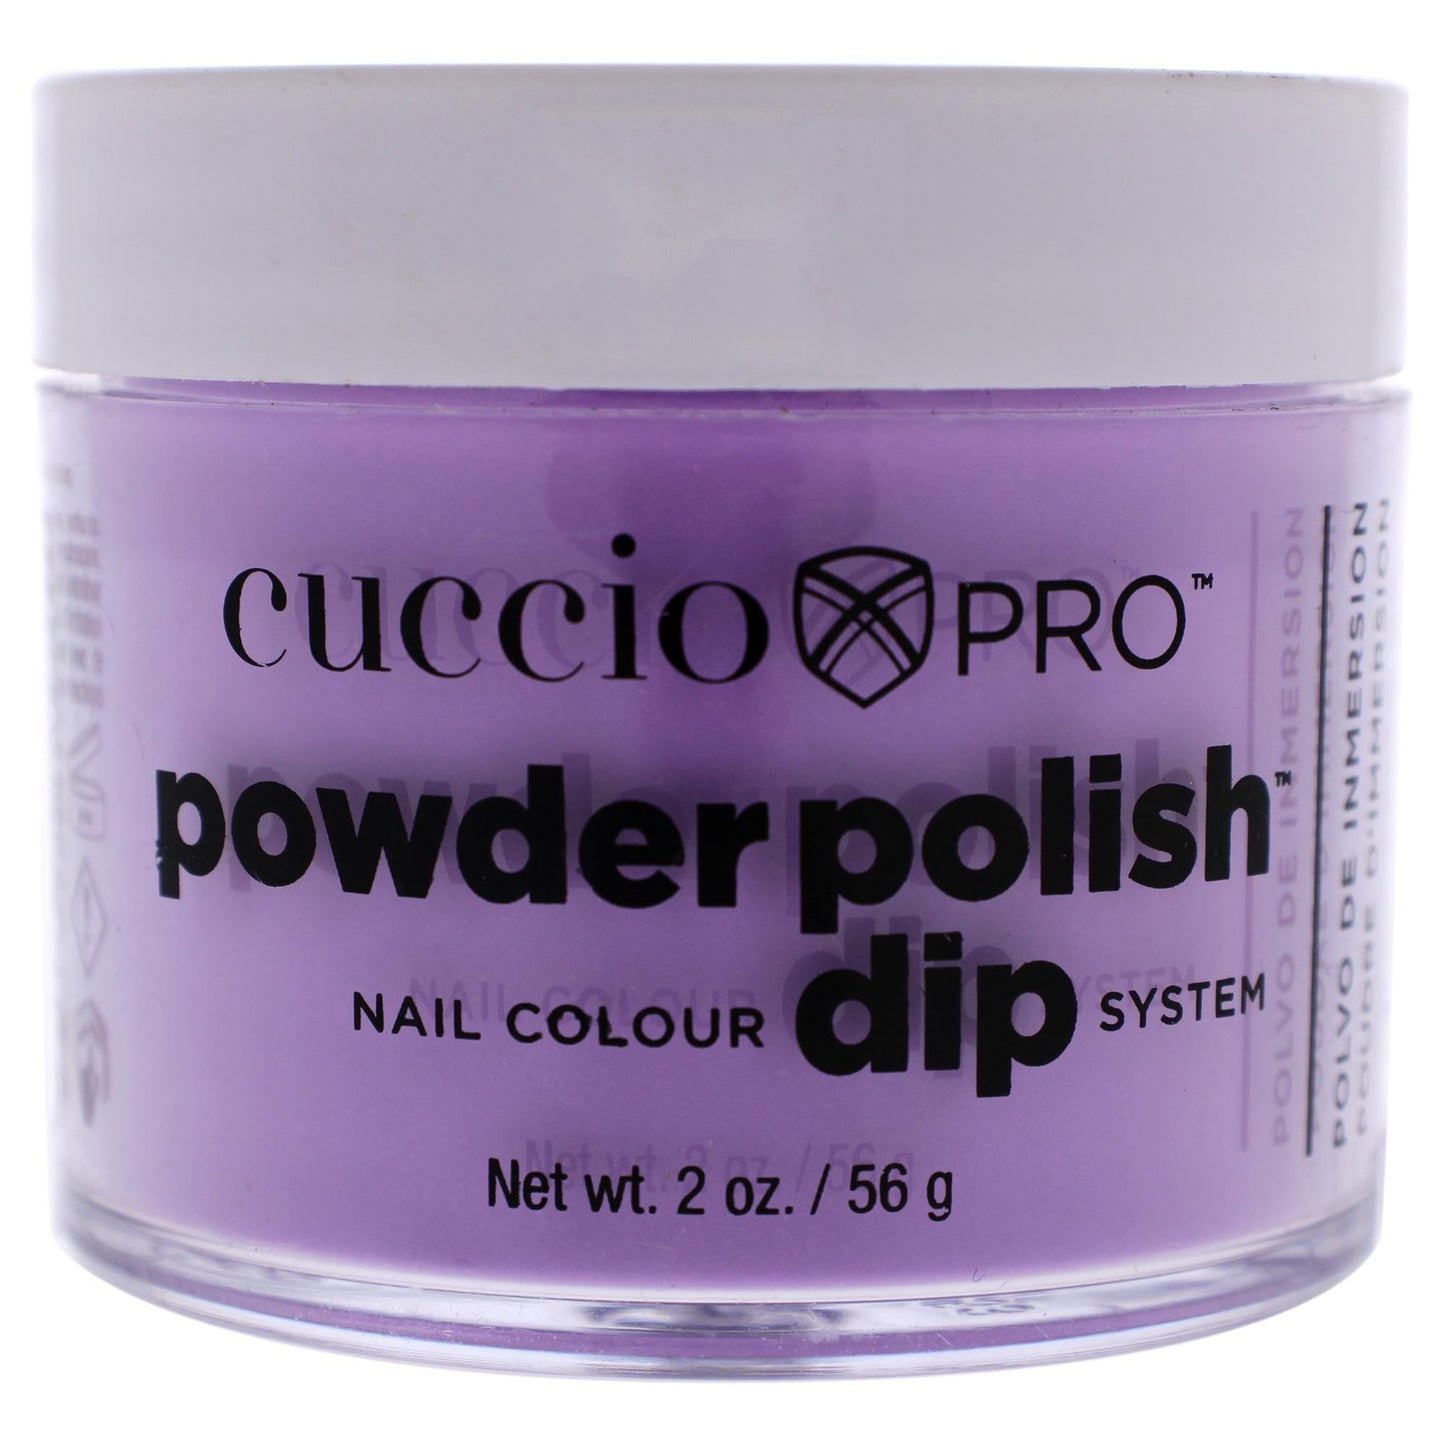 Cuccio Colour Powder Nail Polish - Lacquer For Manicures And Pedicures - Highly Pigmented Powder That Is Finely Milled - Strong, Durable Finish With A Flawless Rich Color - Agent Of Change - 1.6 Oz